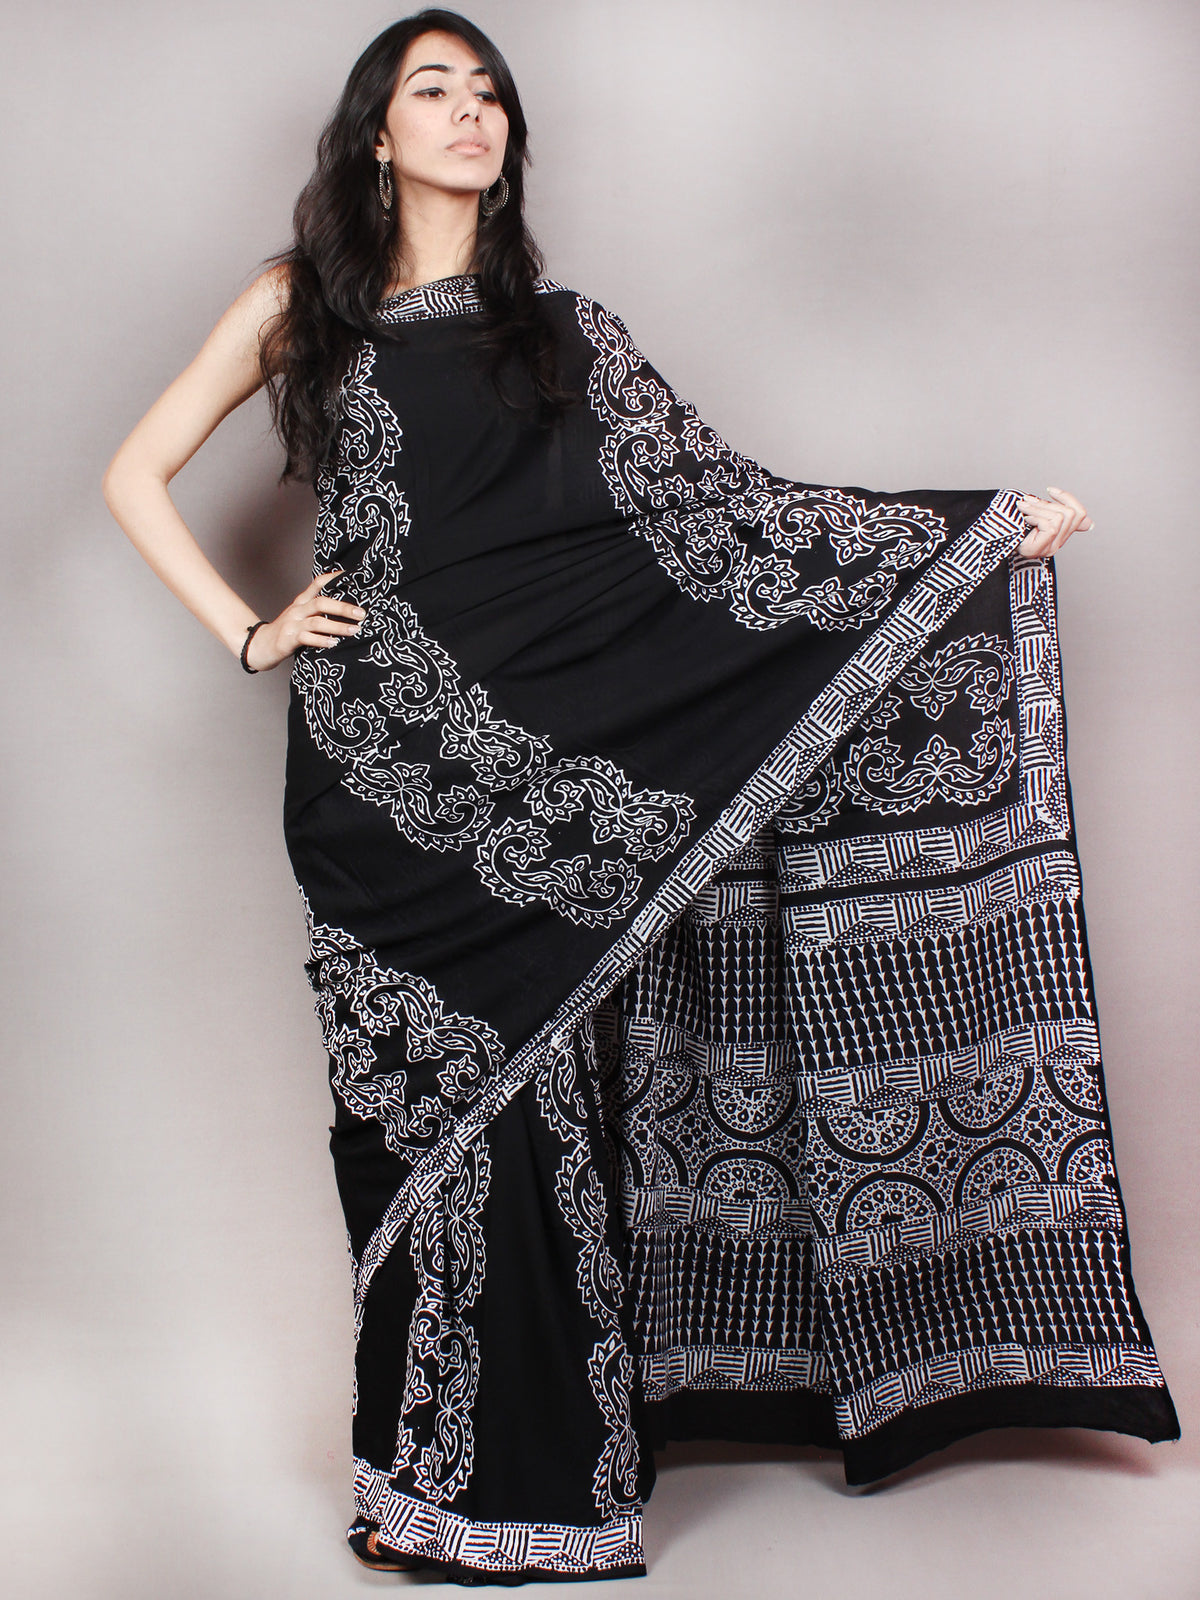 Black White Hand Block Printed Cotton Saree in Natural Colors - S03170819